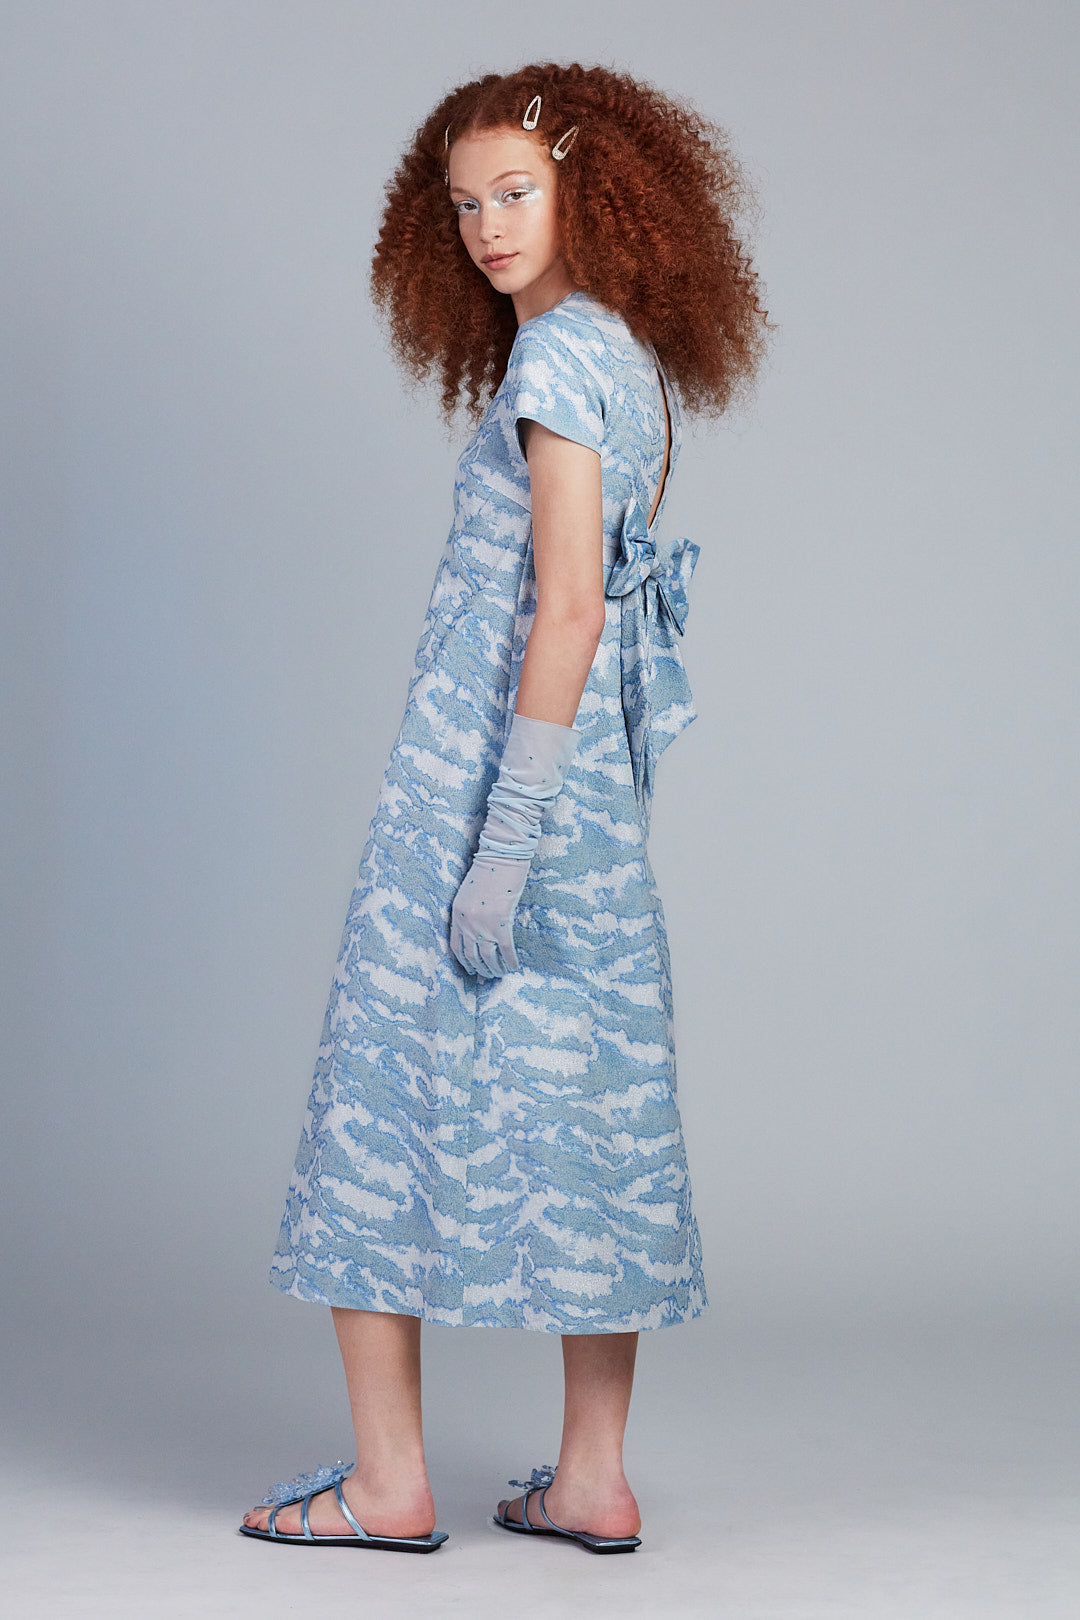 Sauvage Jacquard Dress Powder Blue is tight at the top and looser from the chest to the bottom